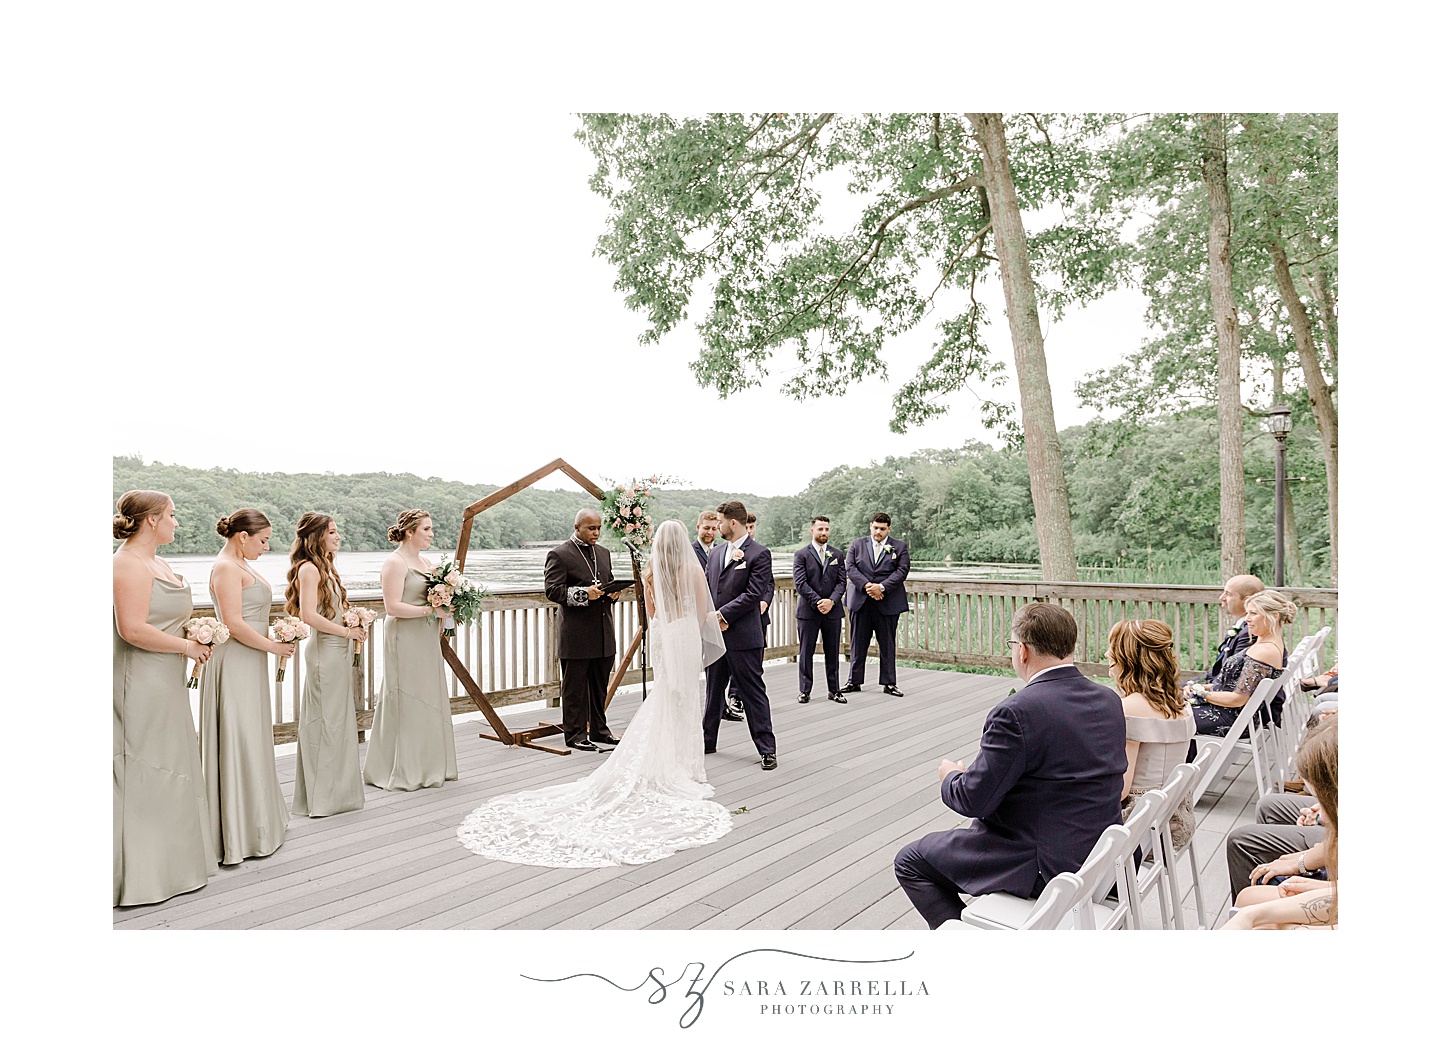 newlyweds hug in front of wooden arbor on dock at Lake of Isles